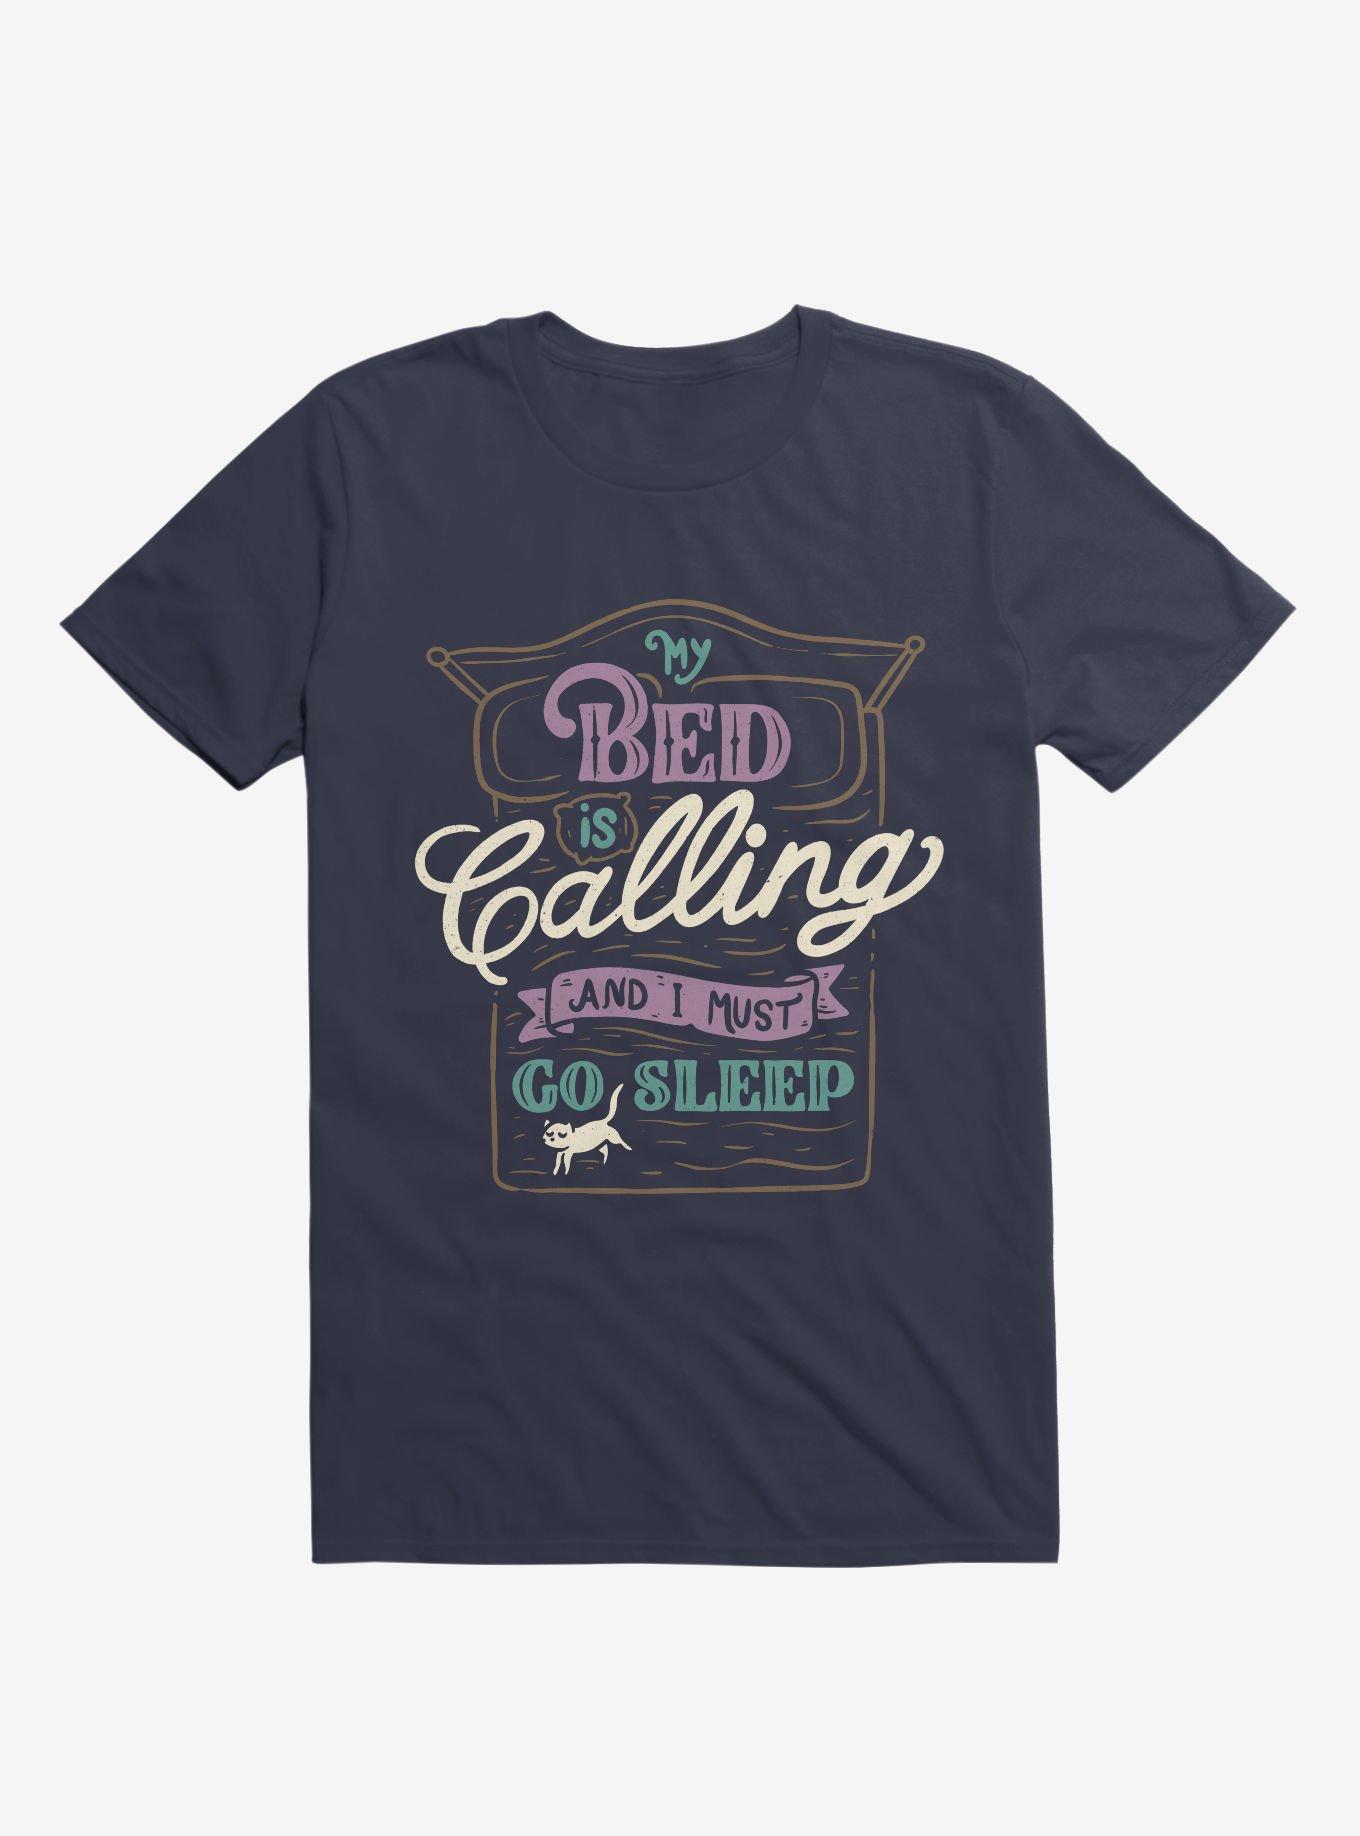 My Bed Is Calling And I Must Go Sleep Navy Blue T-Shirt, NAVY, hi-res